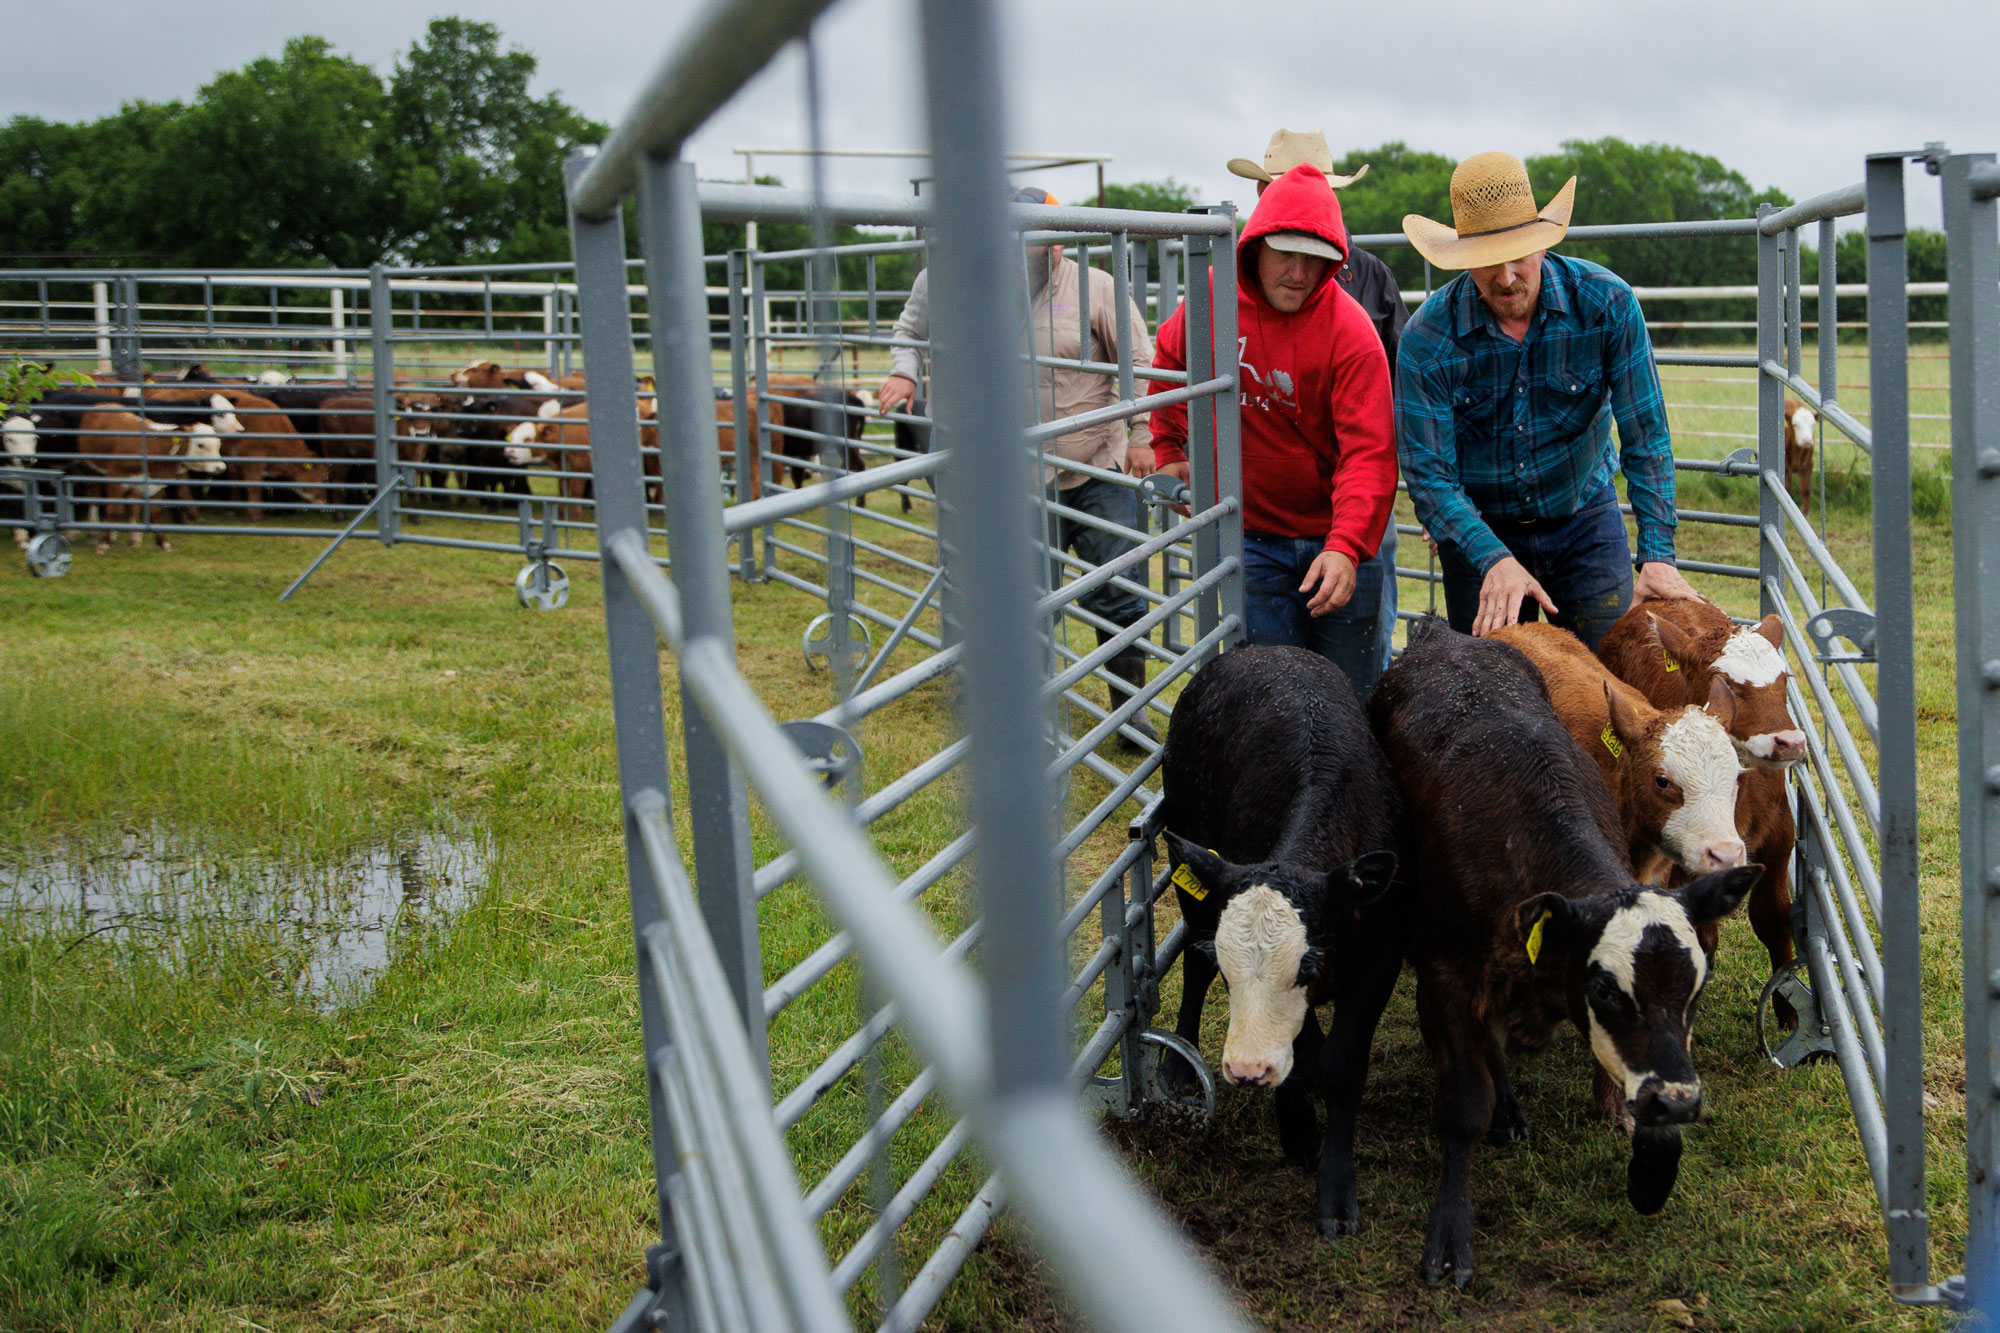 Ranchers guiding cattle through corrals